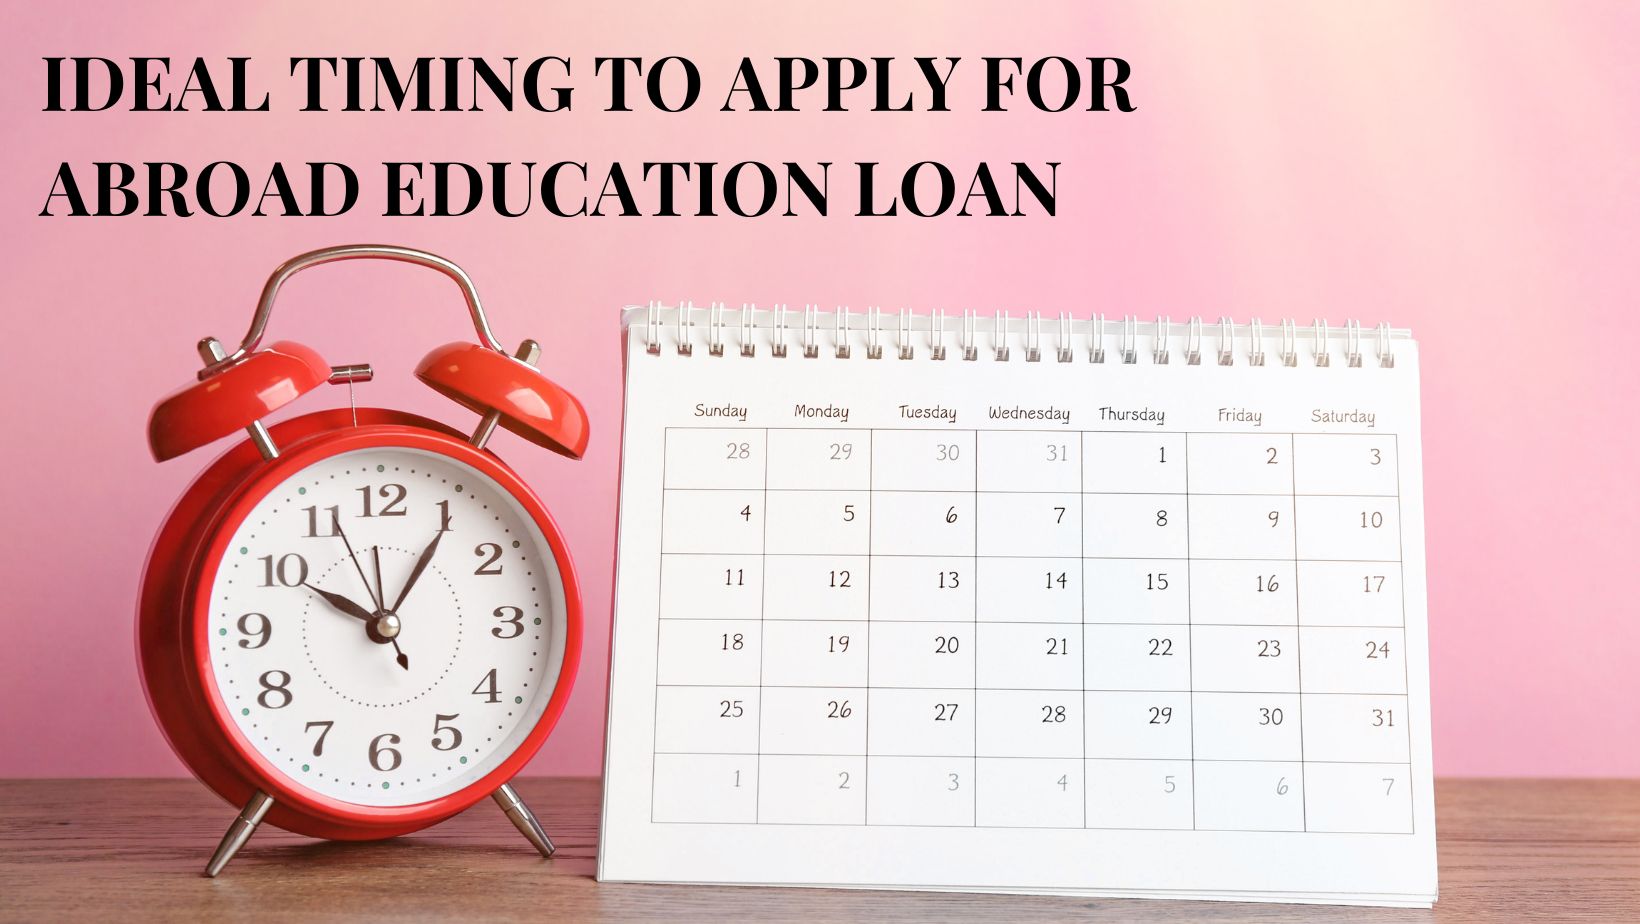 Deciphering the Ideal Timing to Apply for Abroad Education Loan